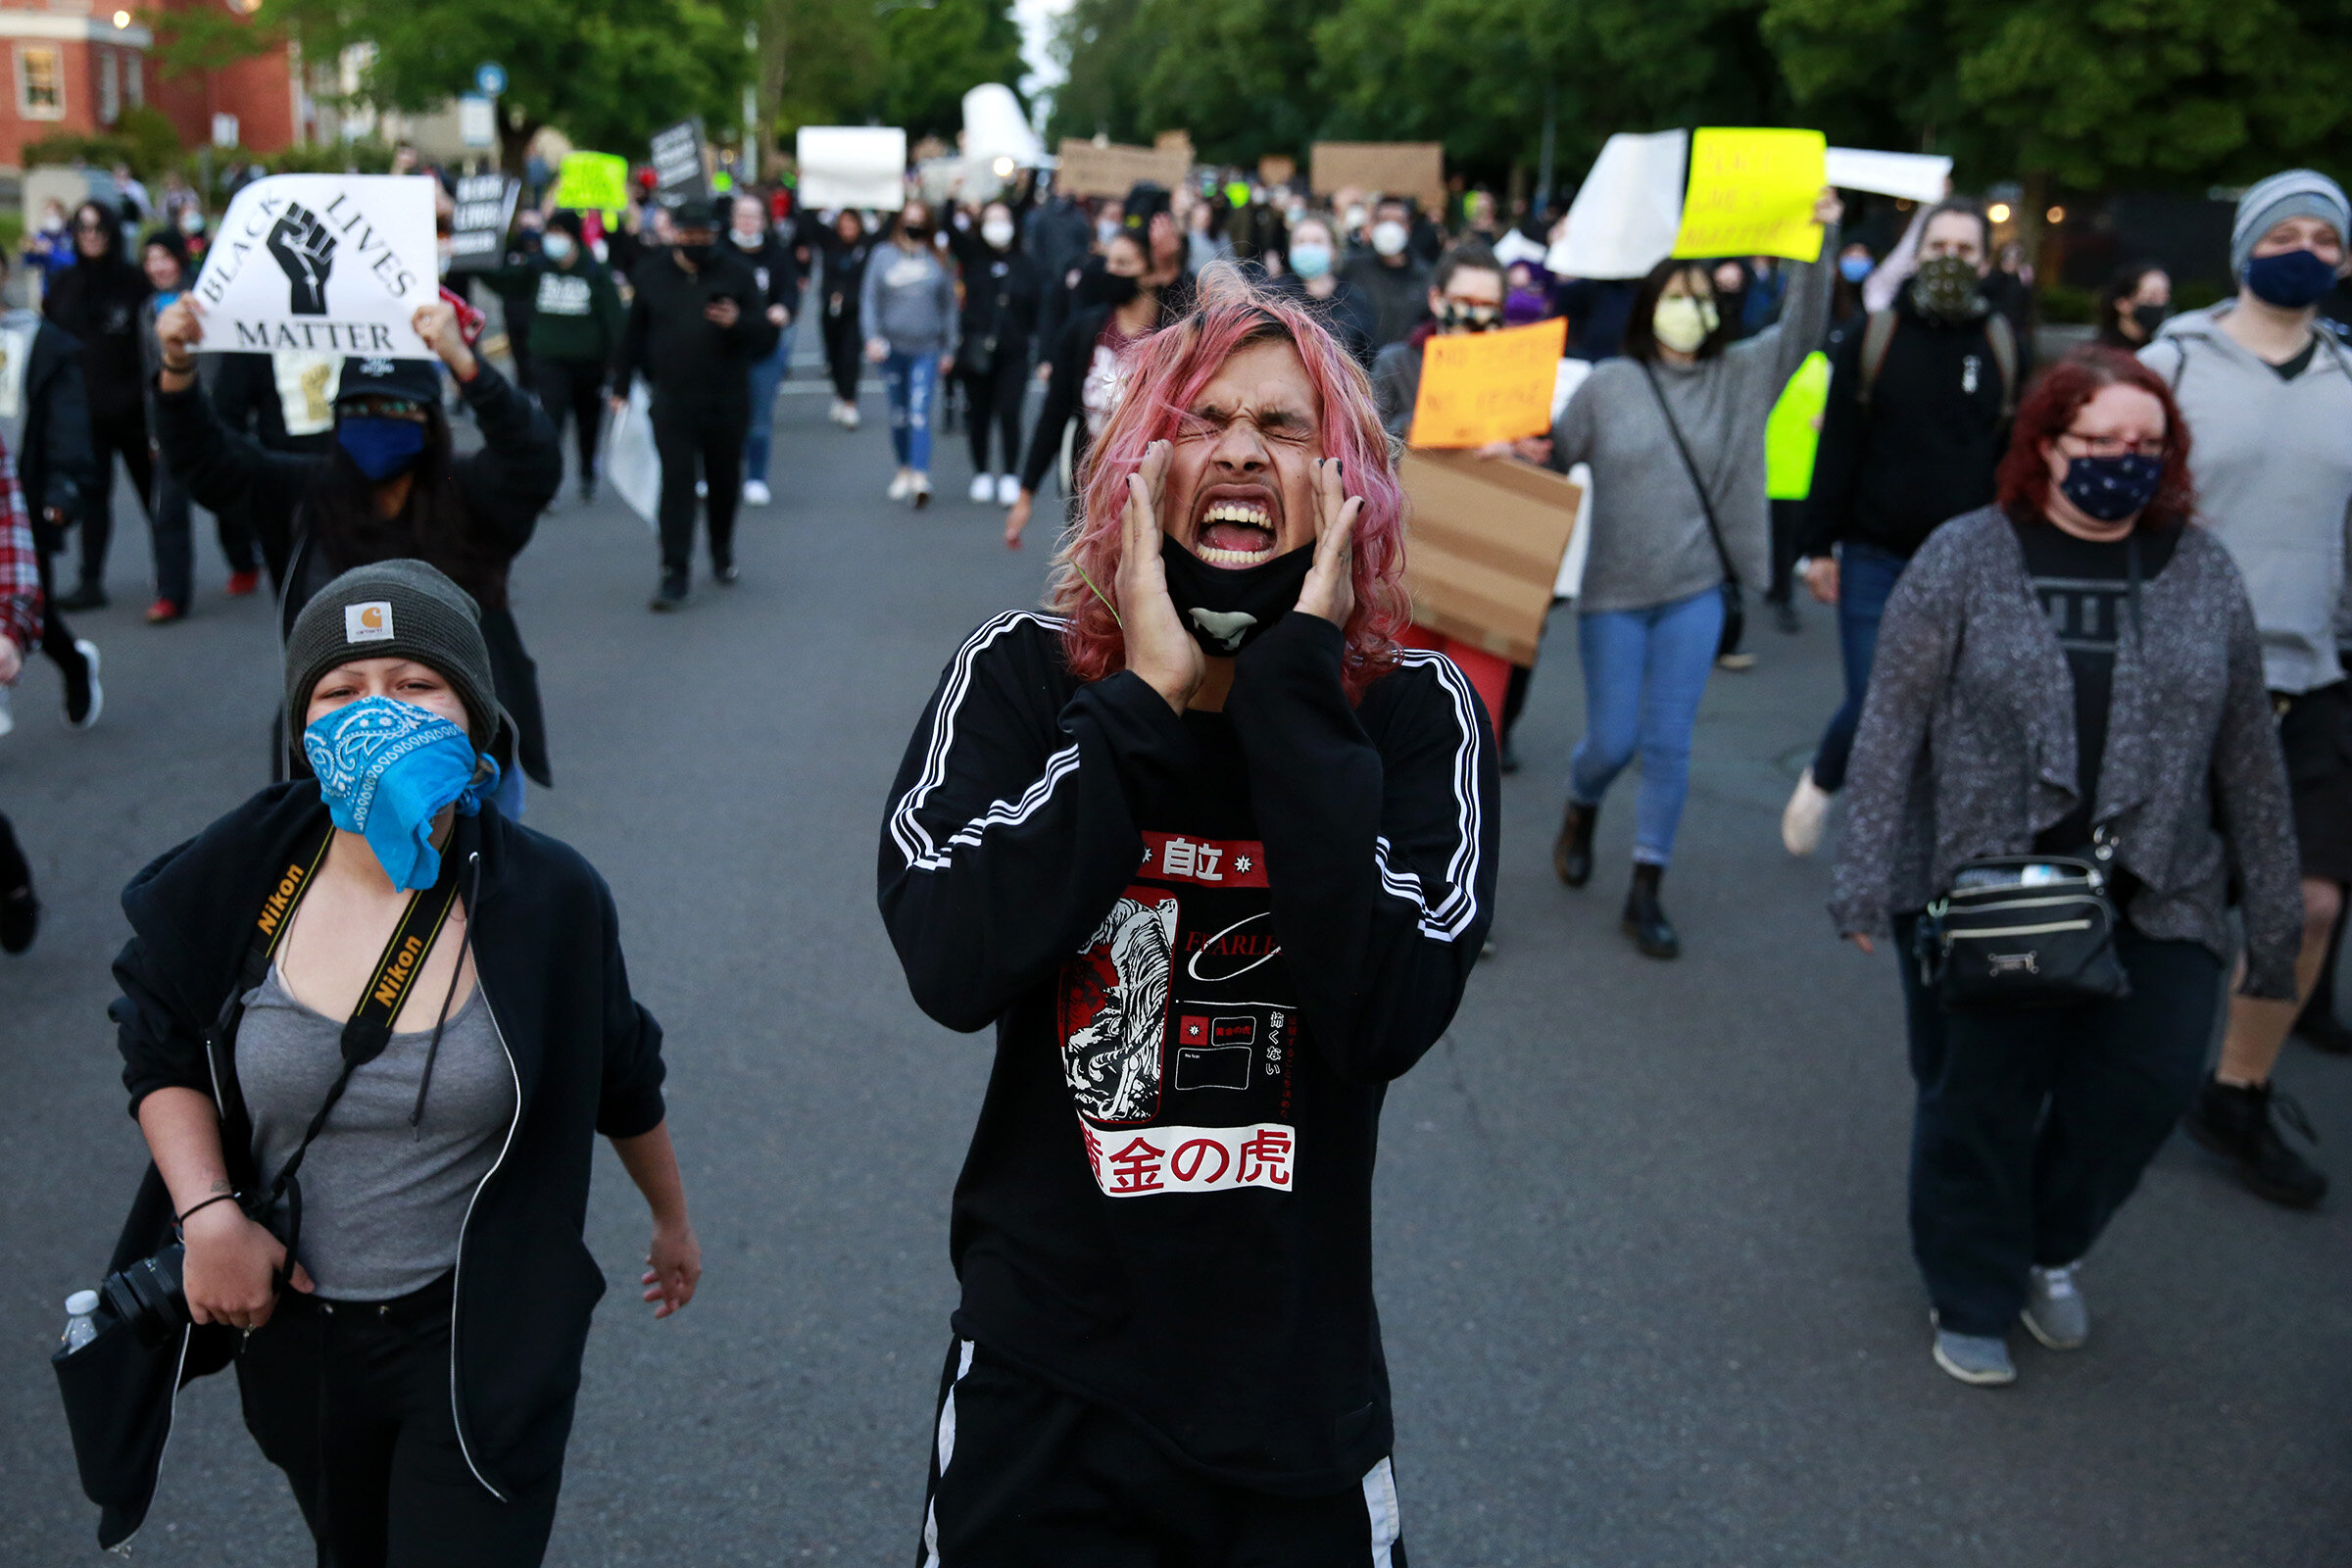  Jacob Hernandez of Salem leads a chant during a protest against police brutality in Salem, Oregon, on Sunday, May 31, 2020. 